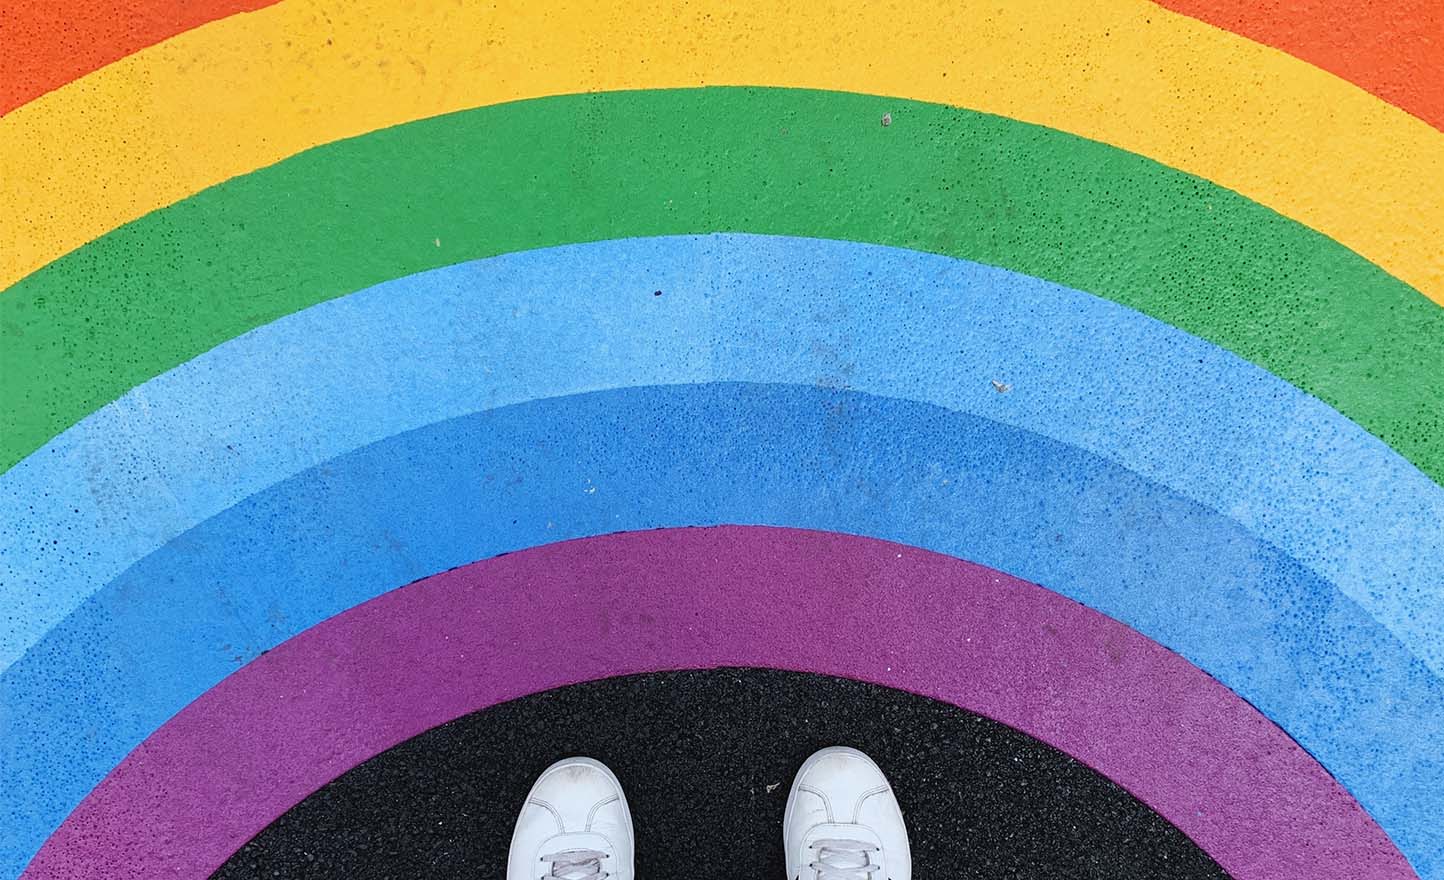 A rainbow painted on pavement, and feet standing on it